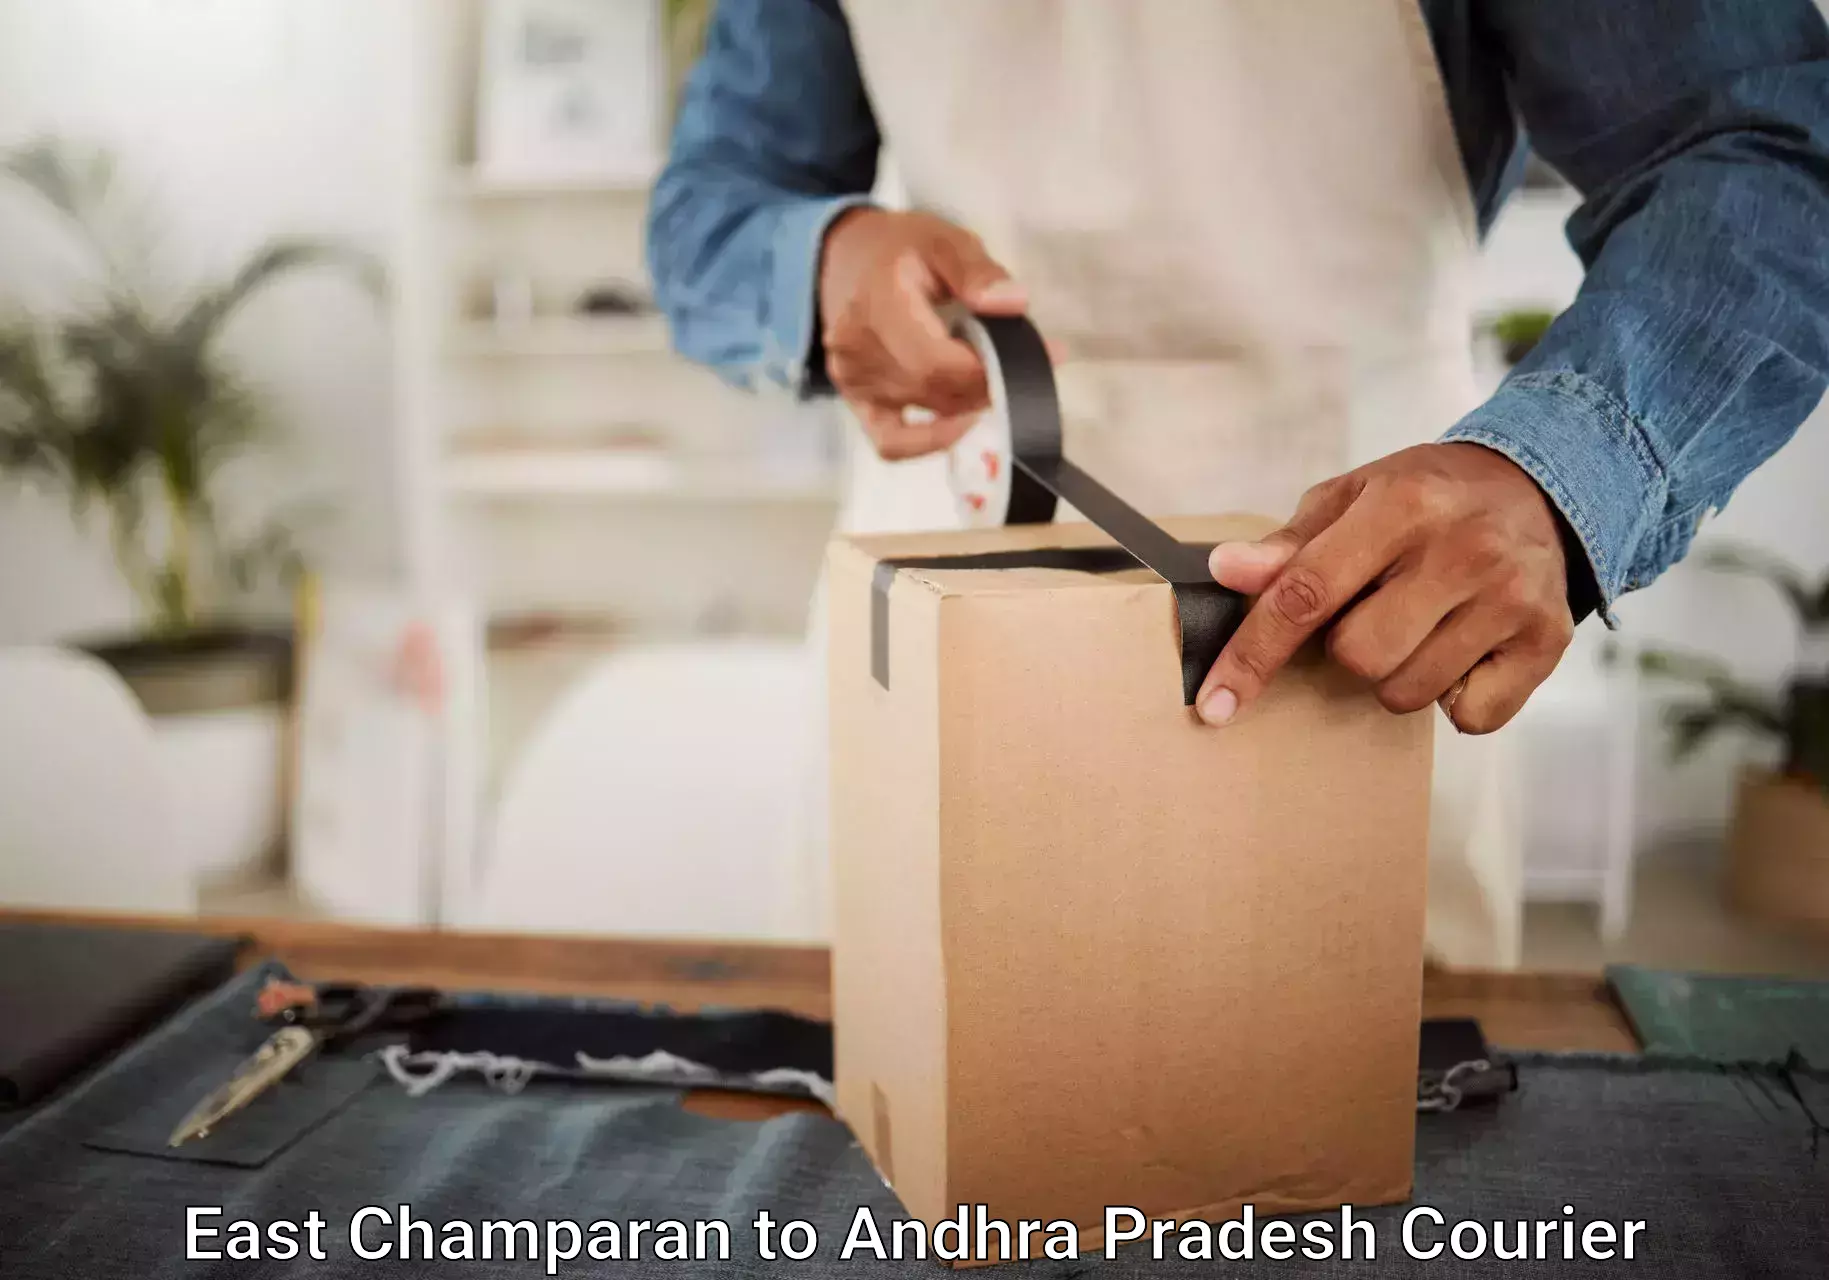 Luggage delivery app East Champaran to Andhra Pradesh